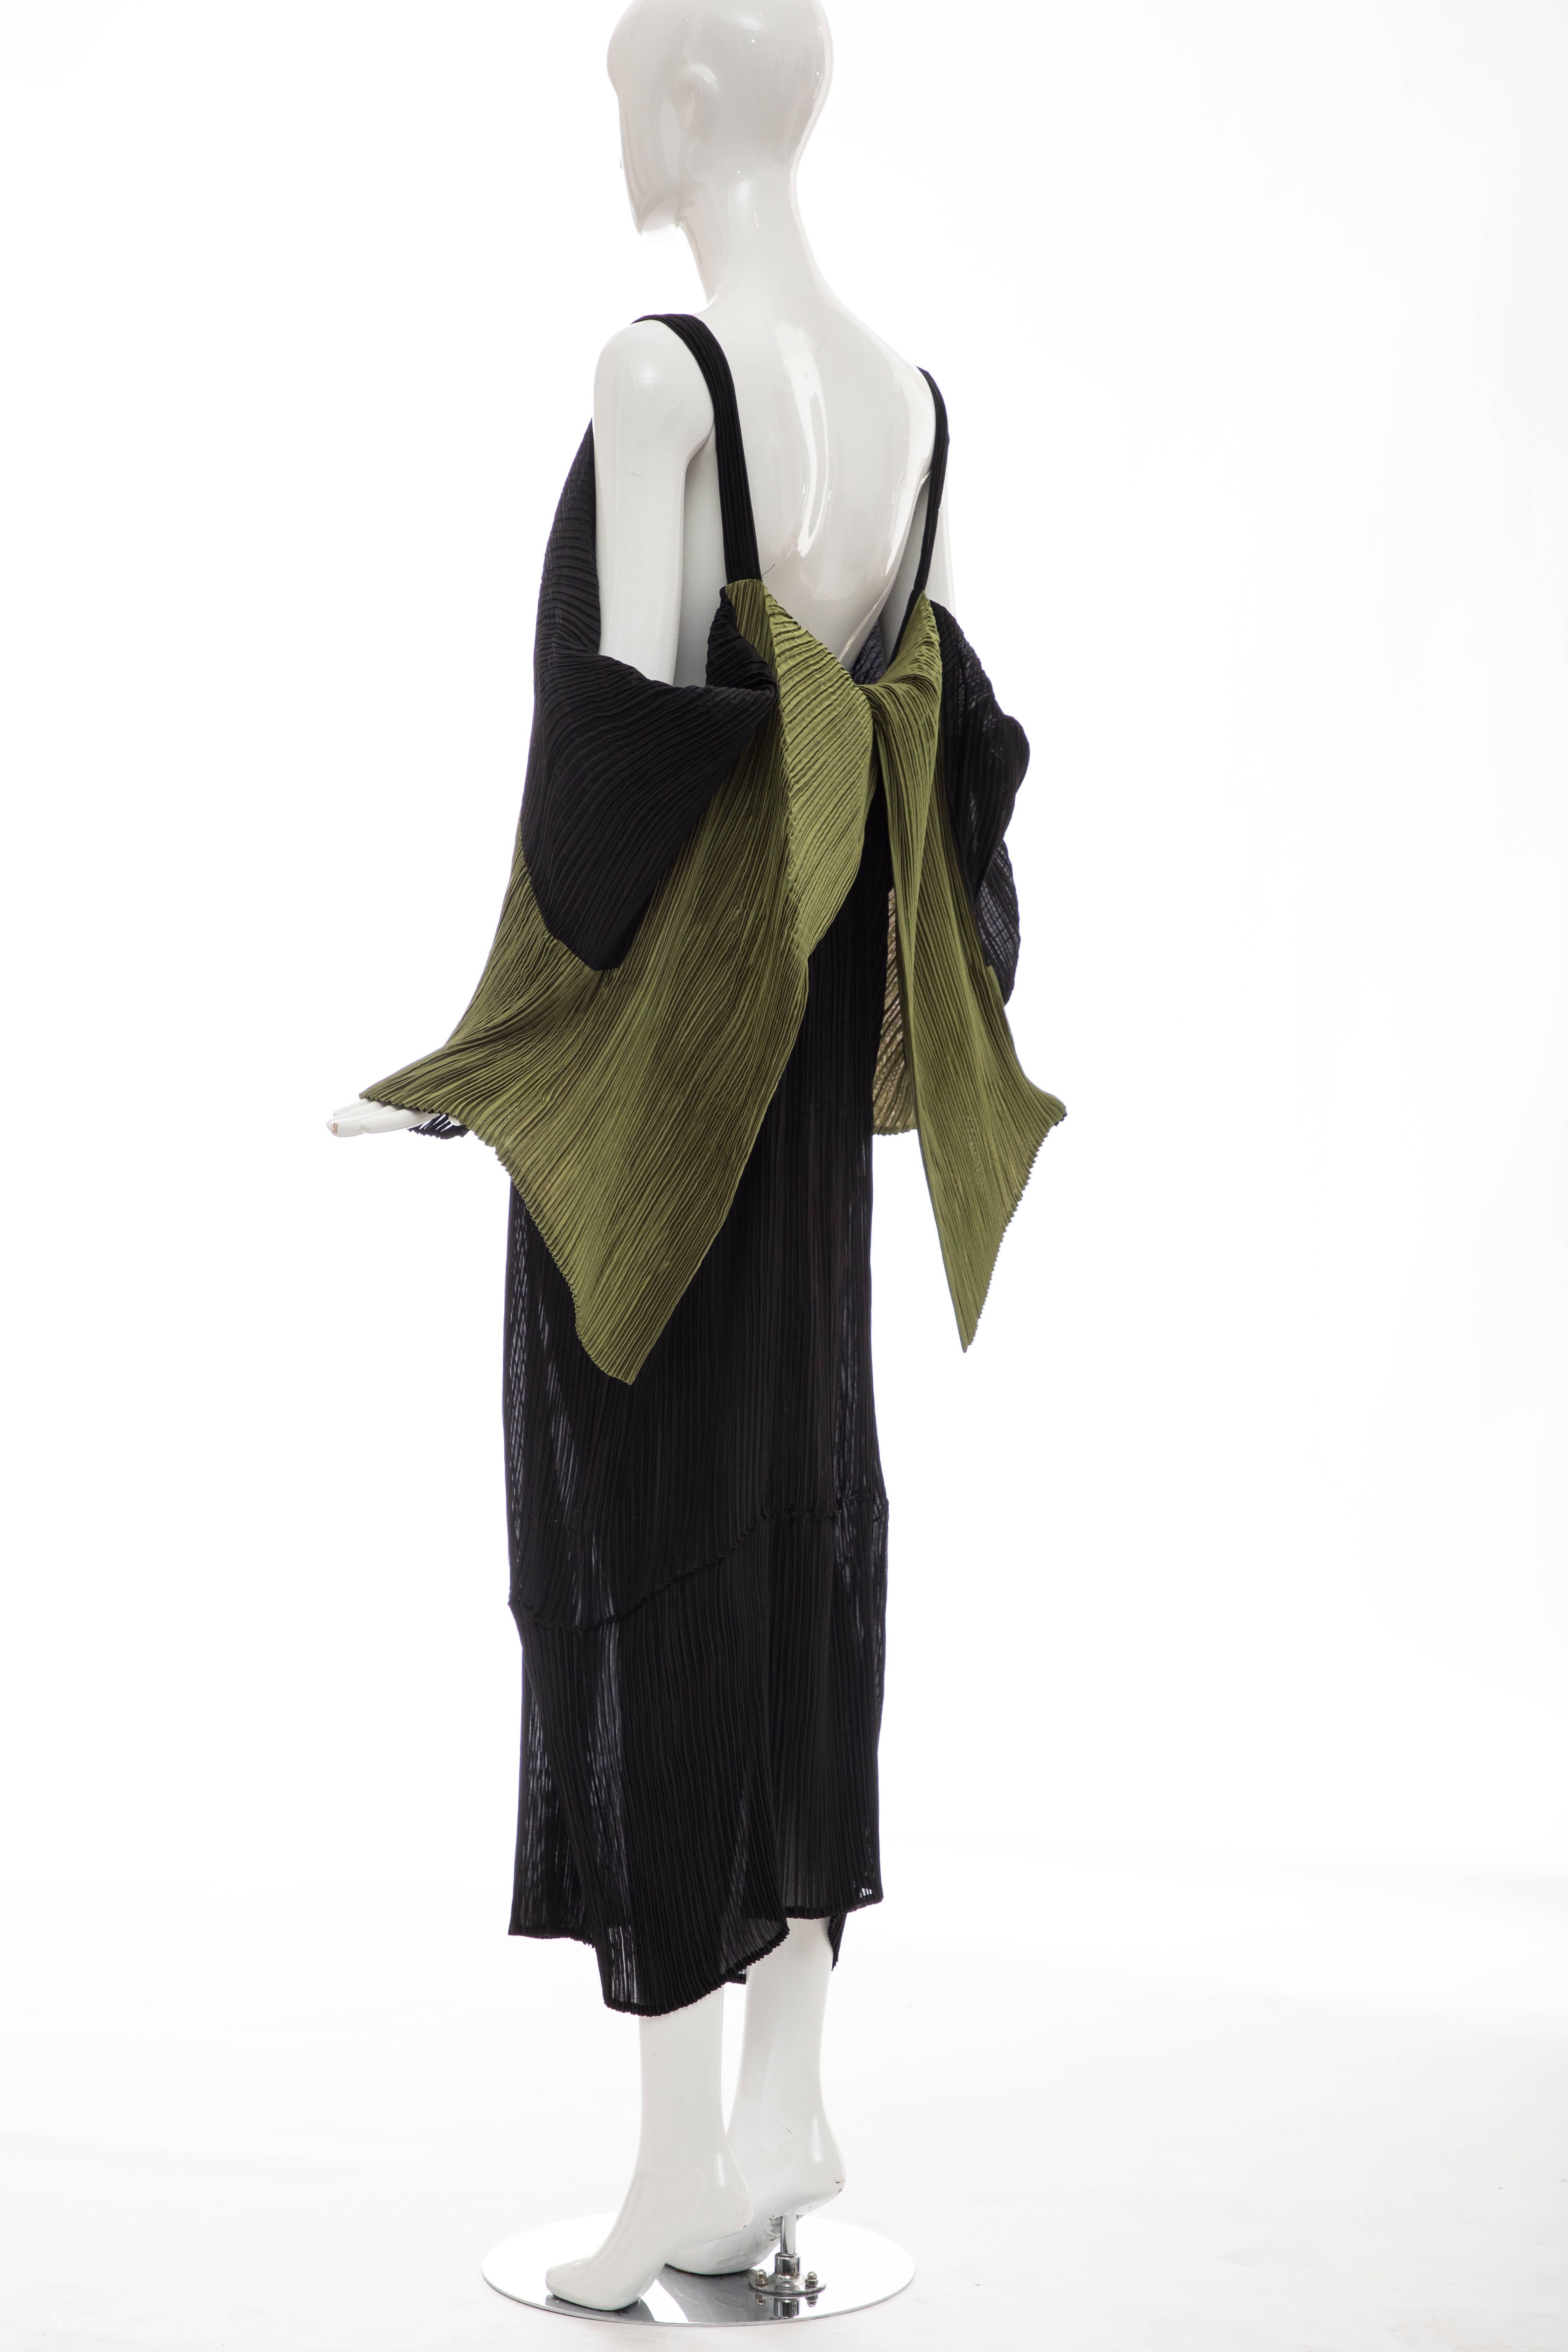 Issey Miyake Black Pleated Dress With Olive Green Panel At Bodice, Circa 1990s 3